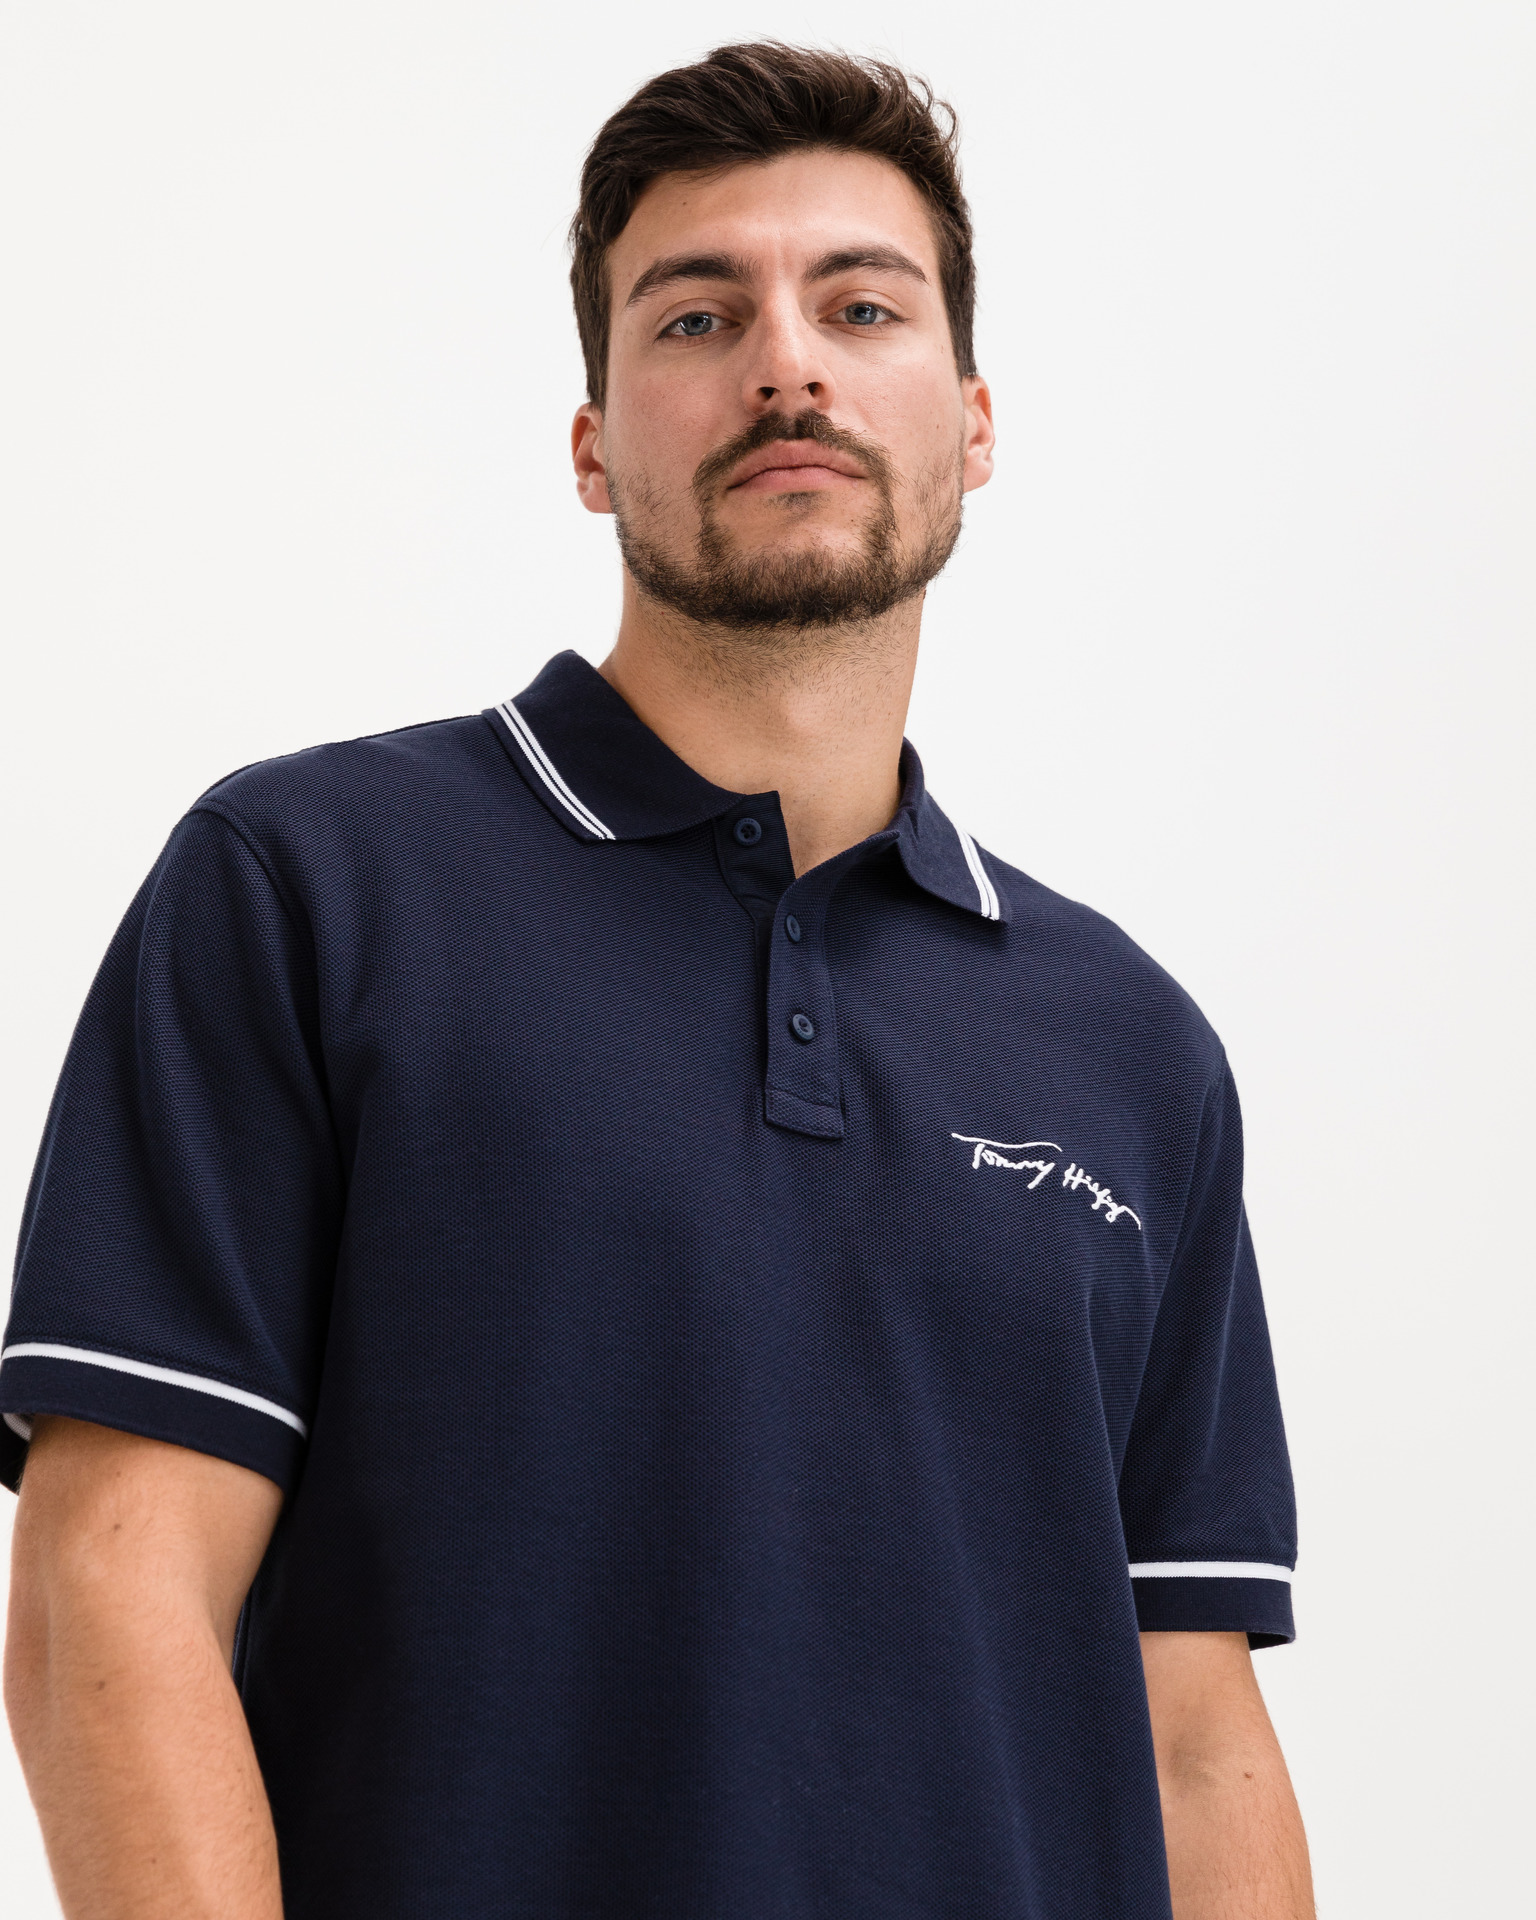 Locomotief College stad Tommy Hilfiger - Tipped Signature Polo Shirt Bibloo.com